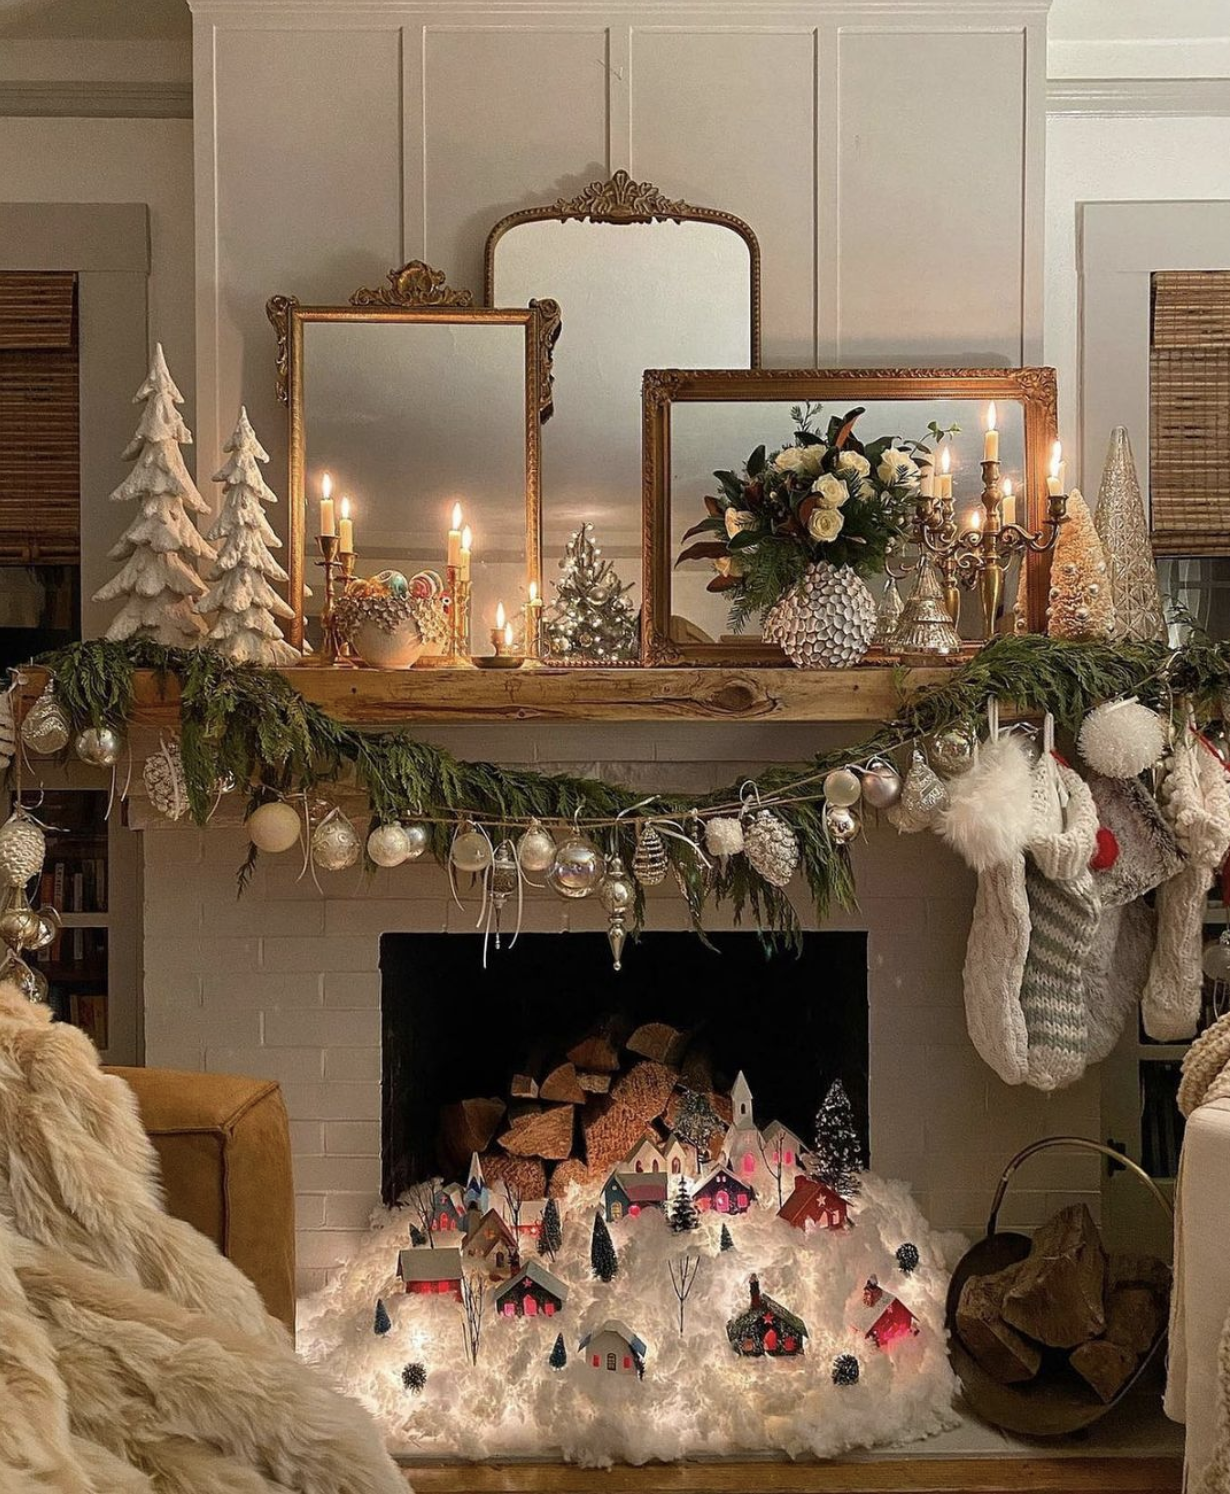 Putz houses in fireplace kellyelko.com love these 12 Creative Christmas decorating ideas 